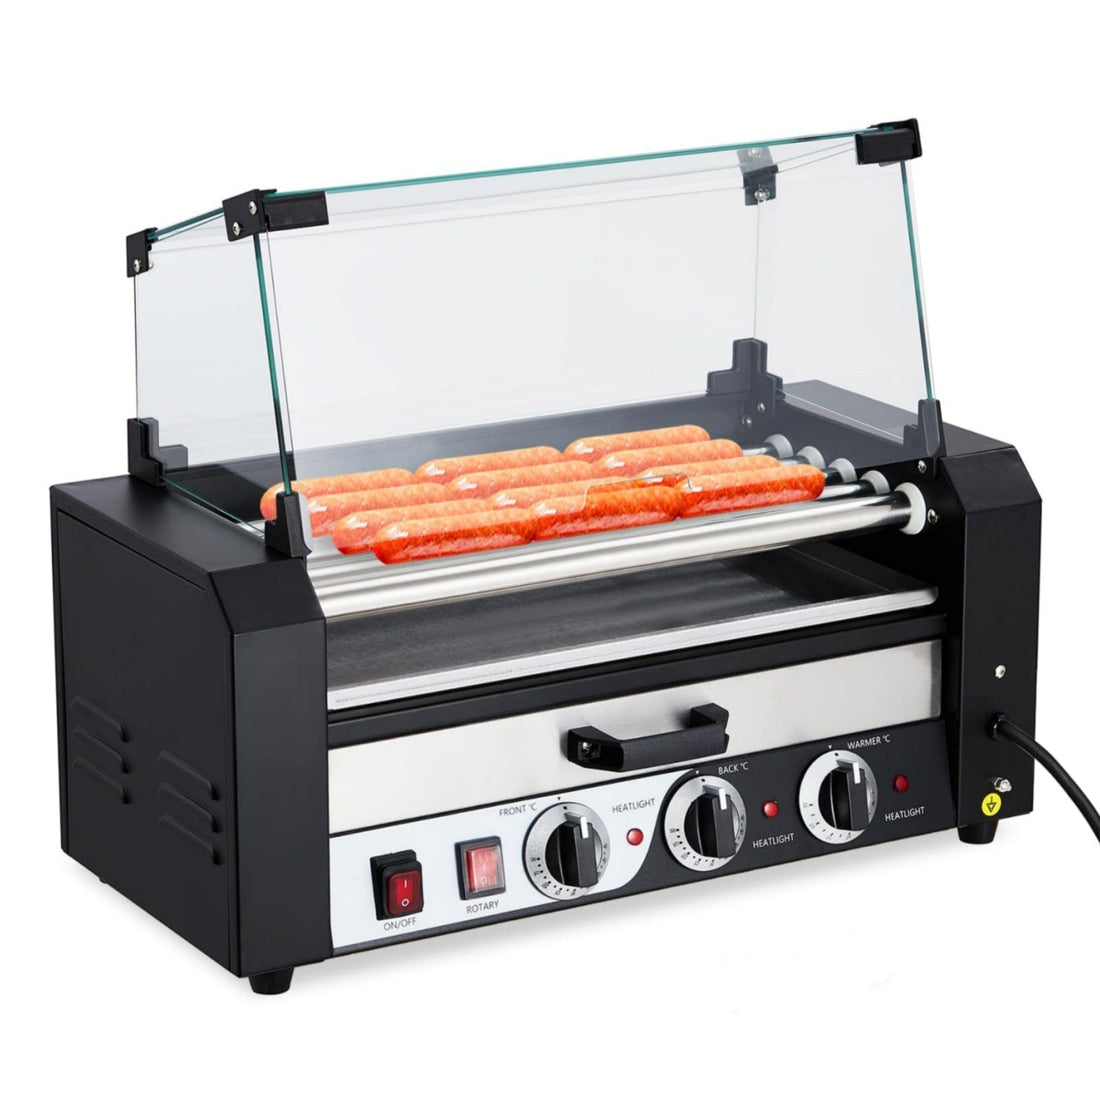 1050W 5-Roller Hot Dog Grill, 12 Capacity, Stainless Steel